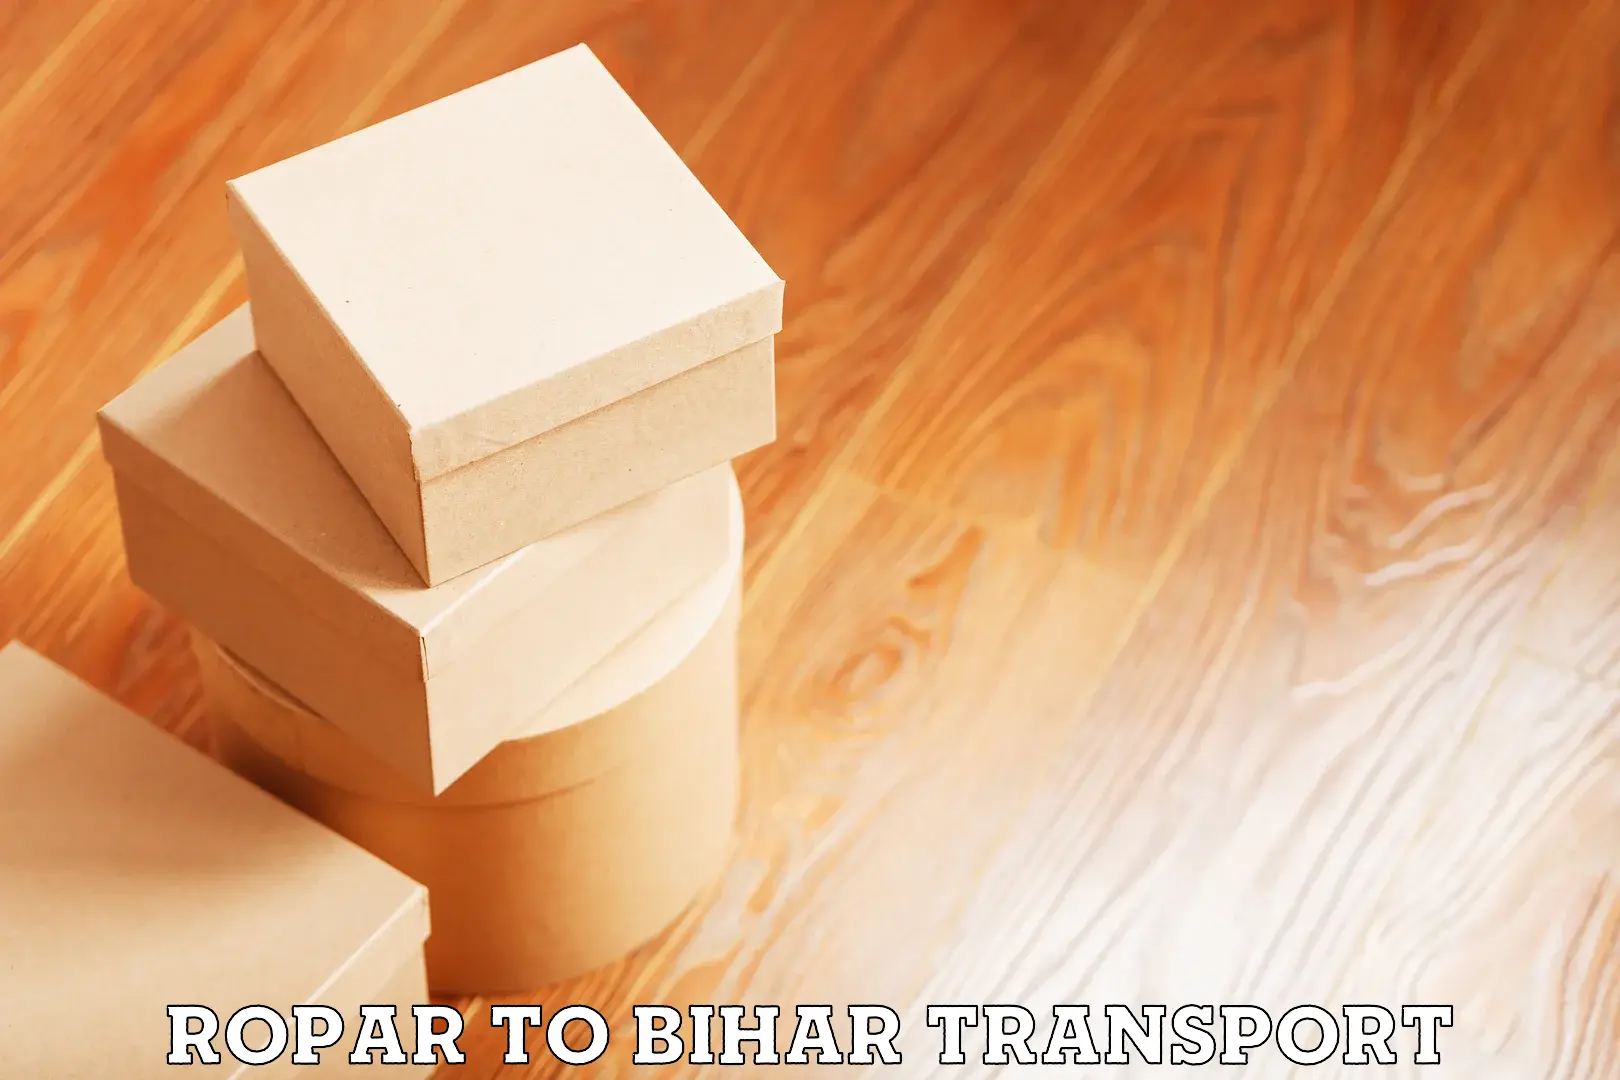 Transport shared services Ropar to Katihar